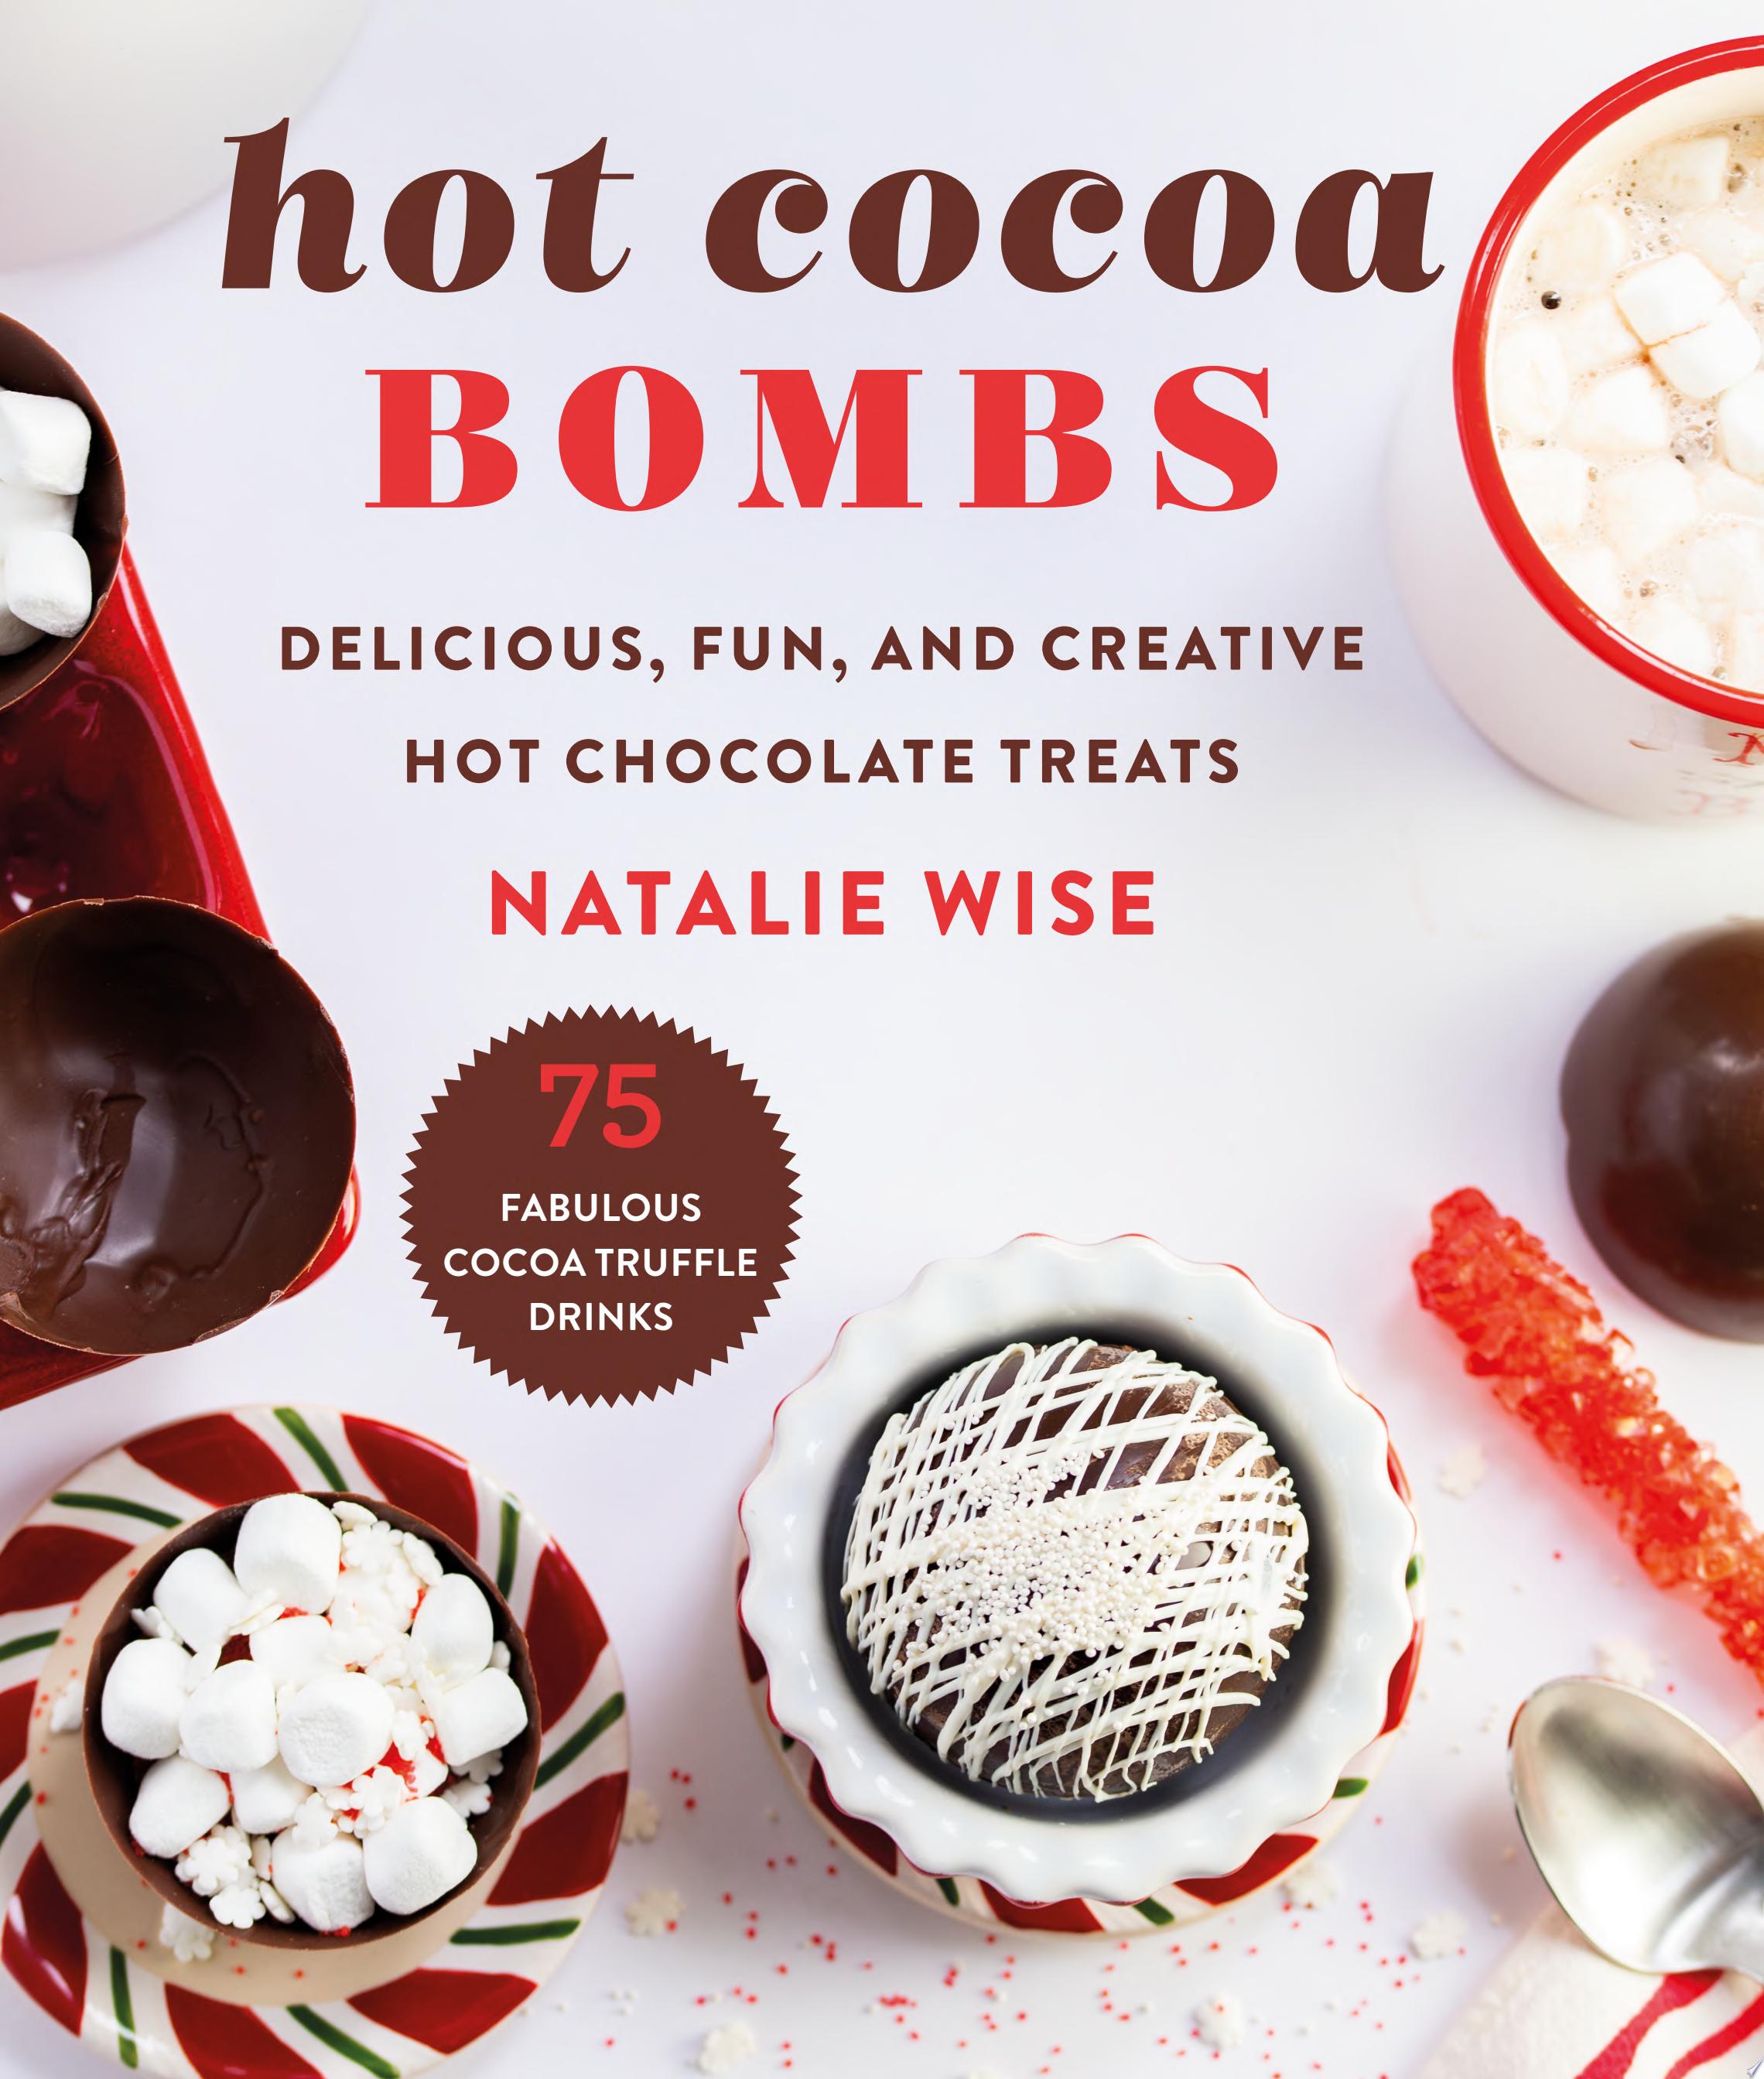 Image for "Hot Cocoa Bombs"